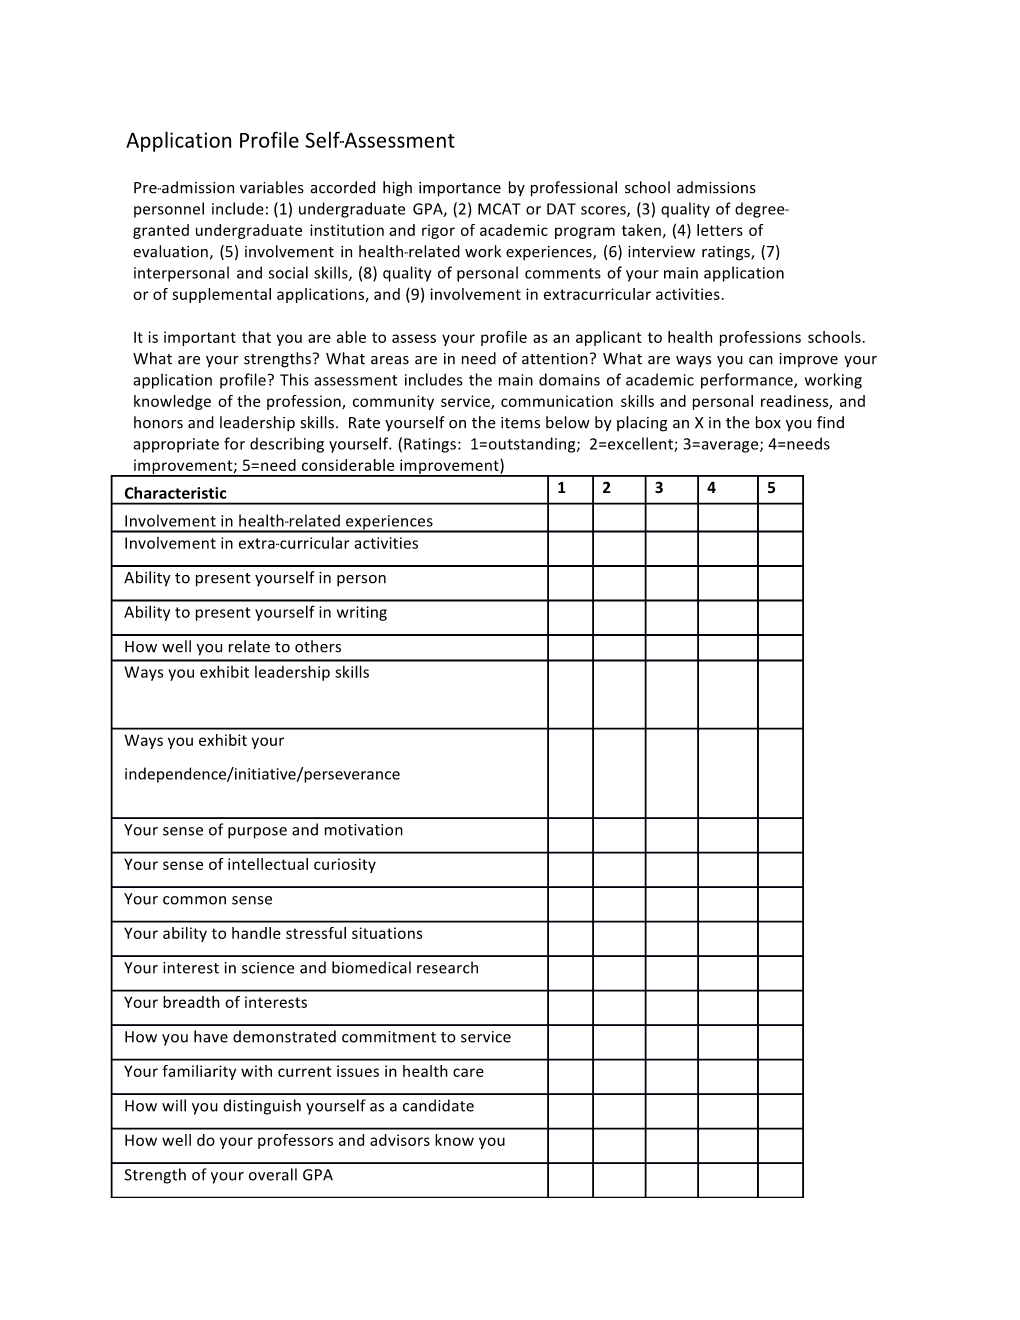 Credentials Review Worksheet Application for 2016Professional School Admission